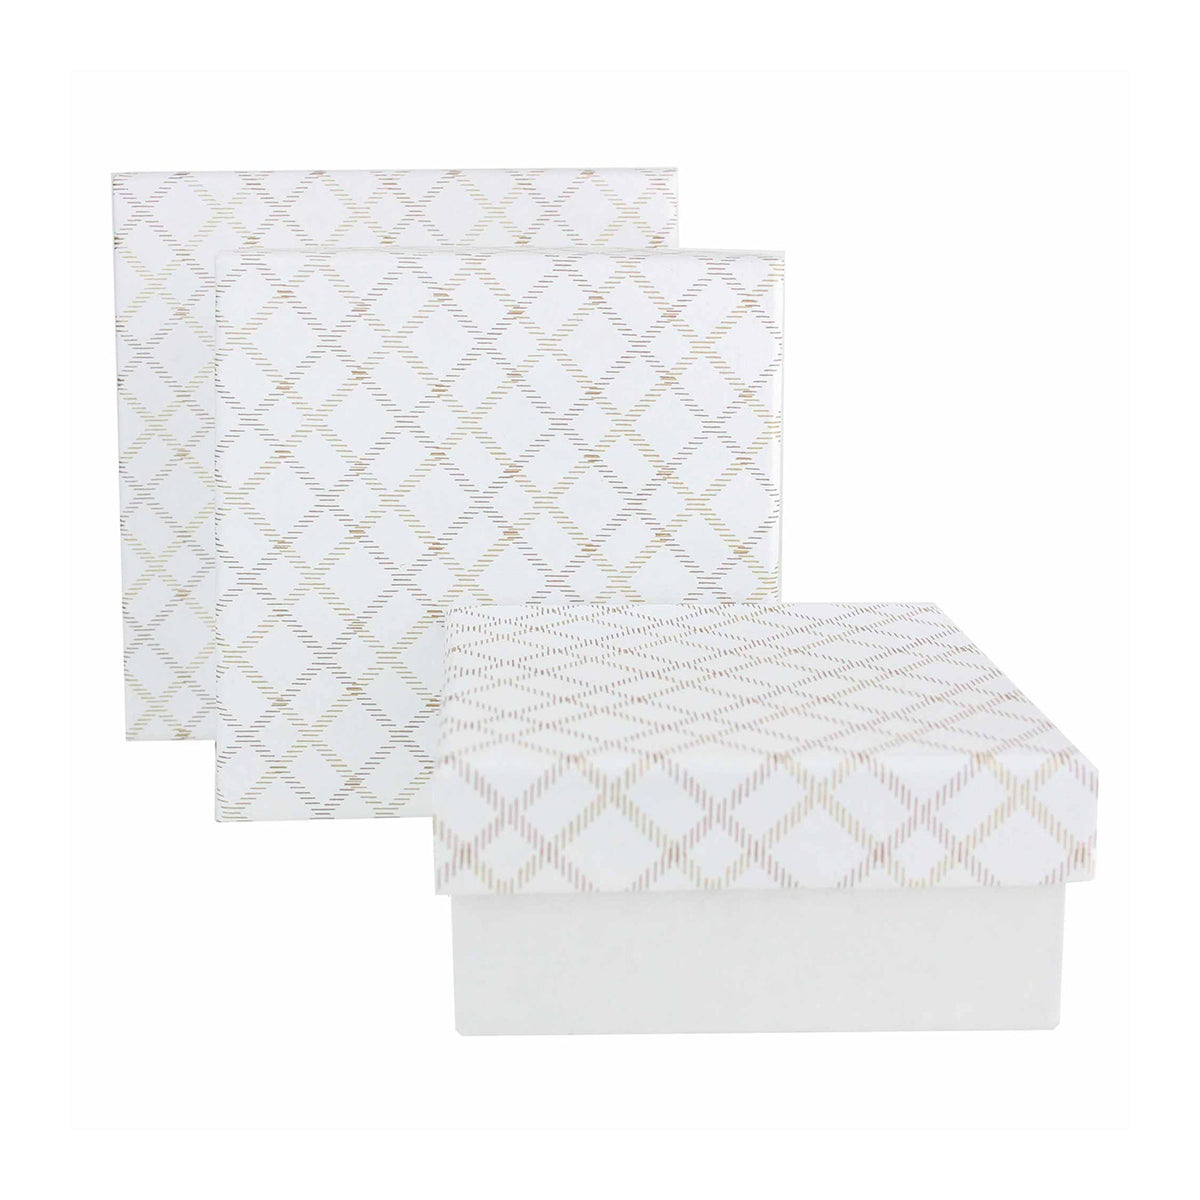 Handcrafted Chequered White Gift Boxes - Set of 3